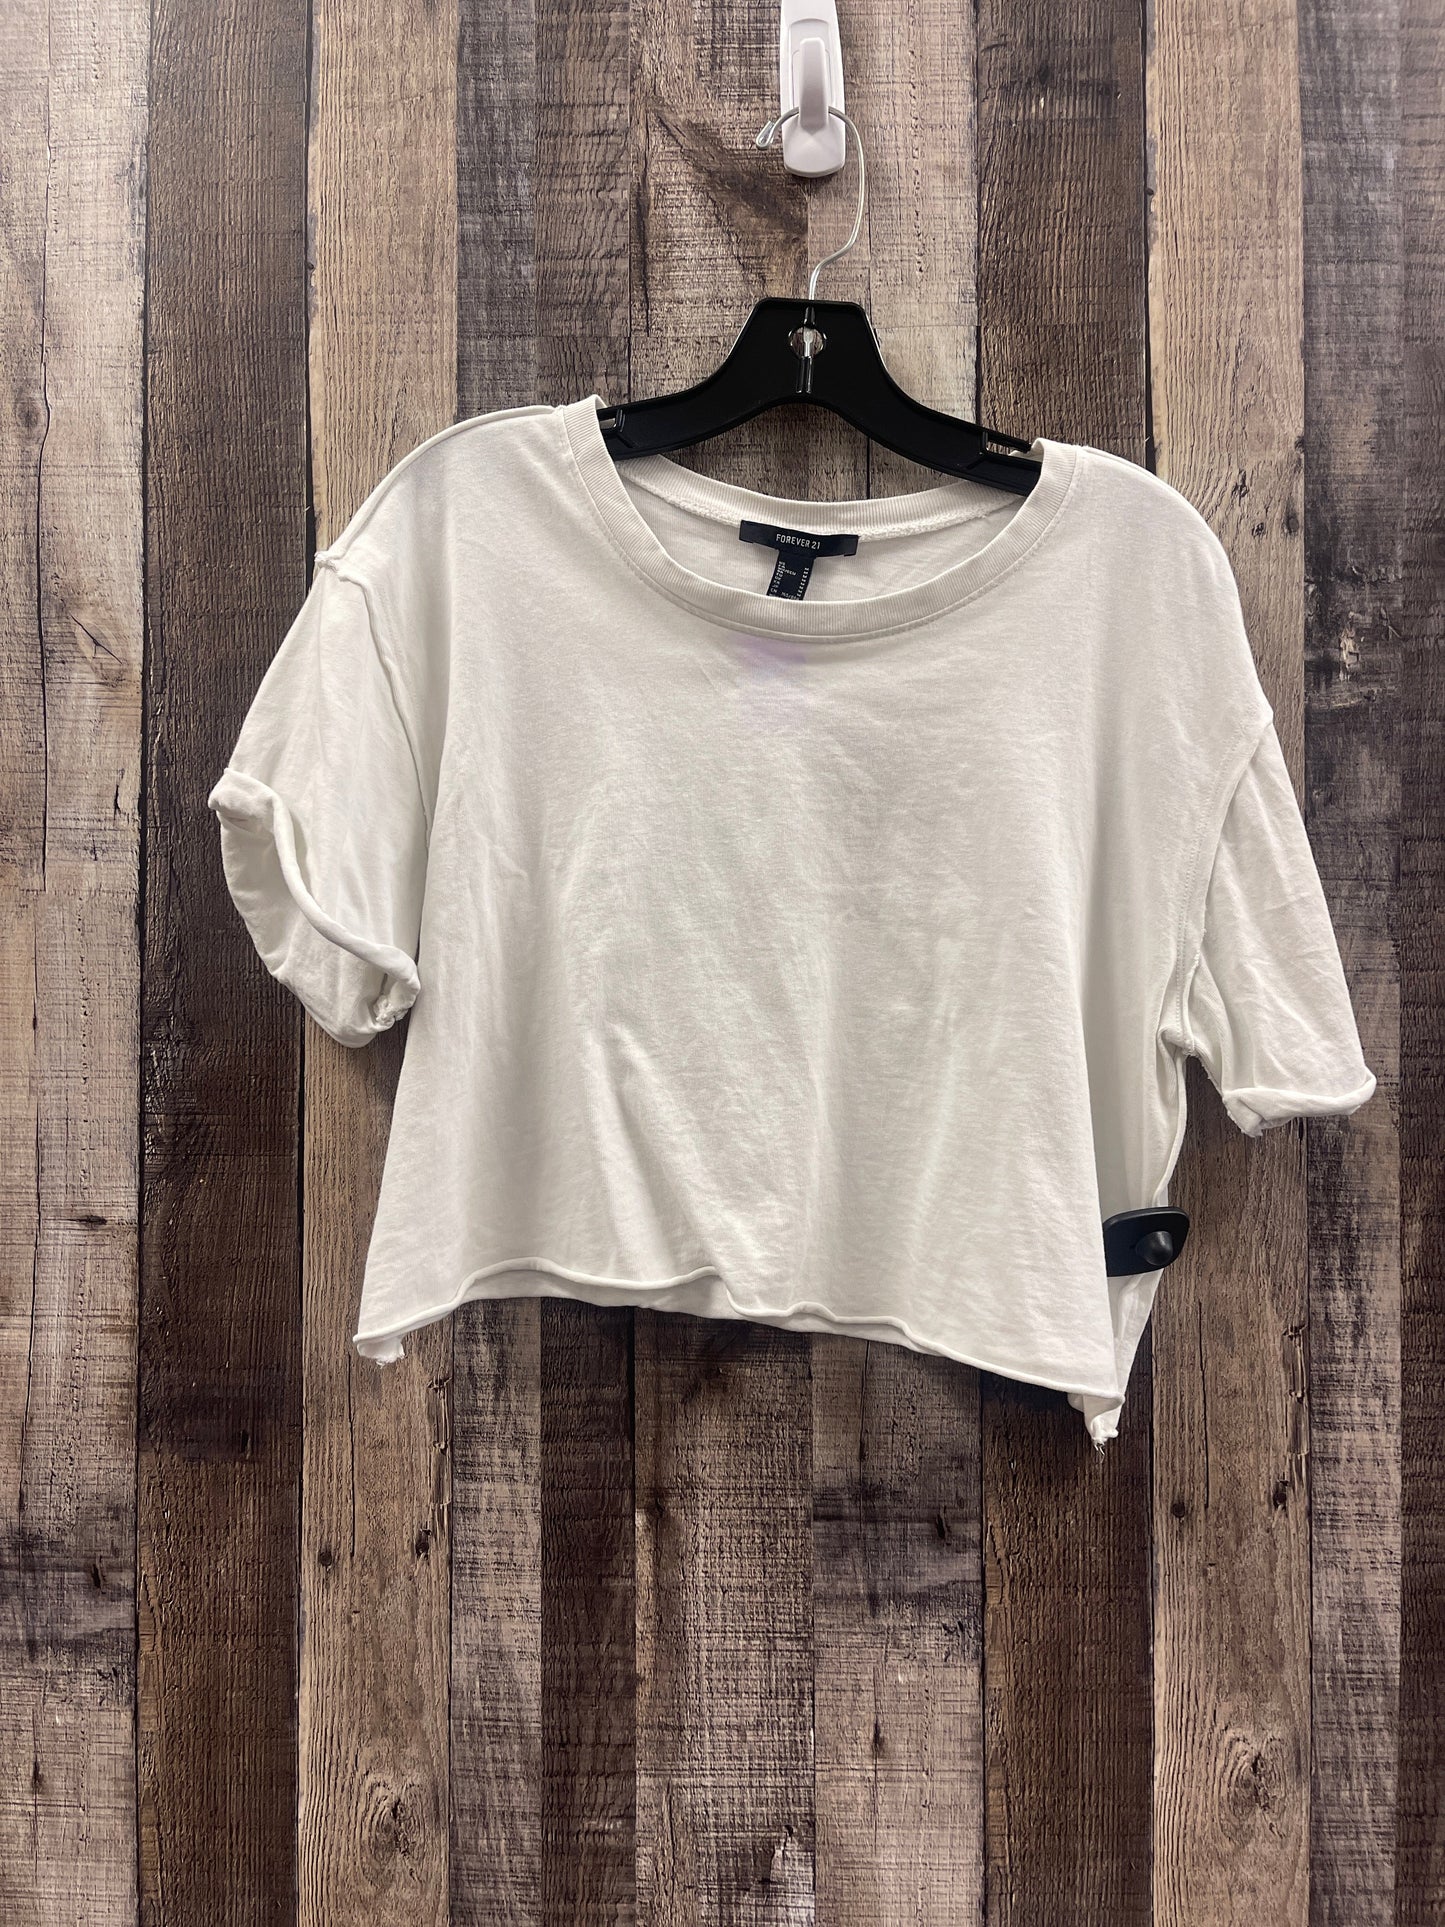 White Top Short Sleeve Forever 21, Size M